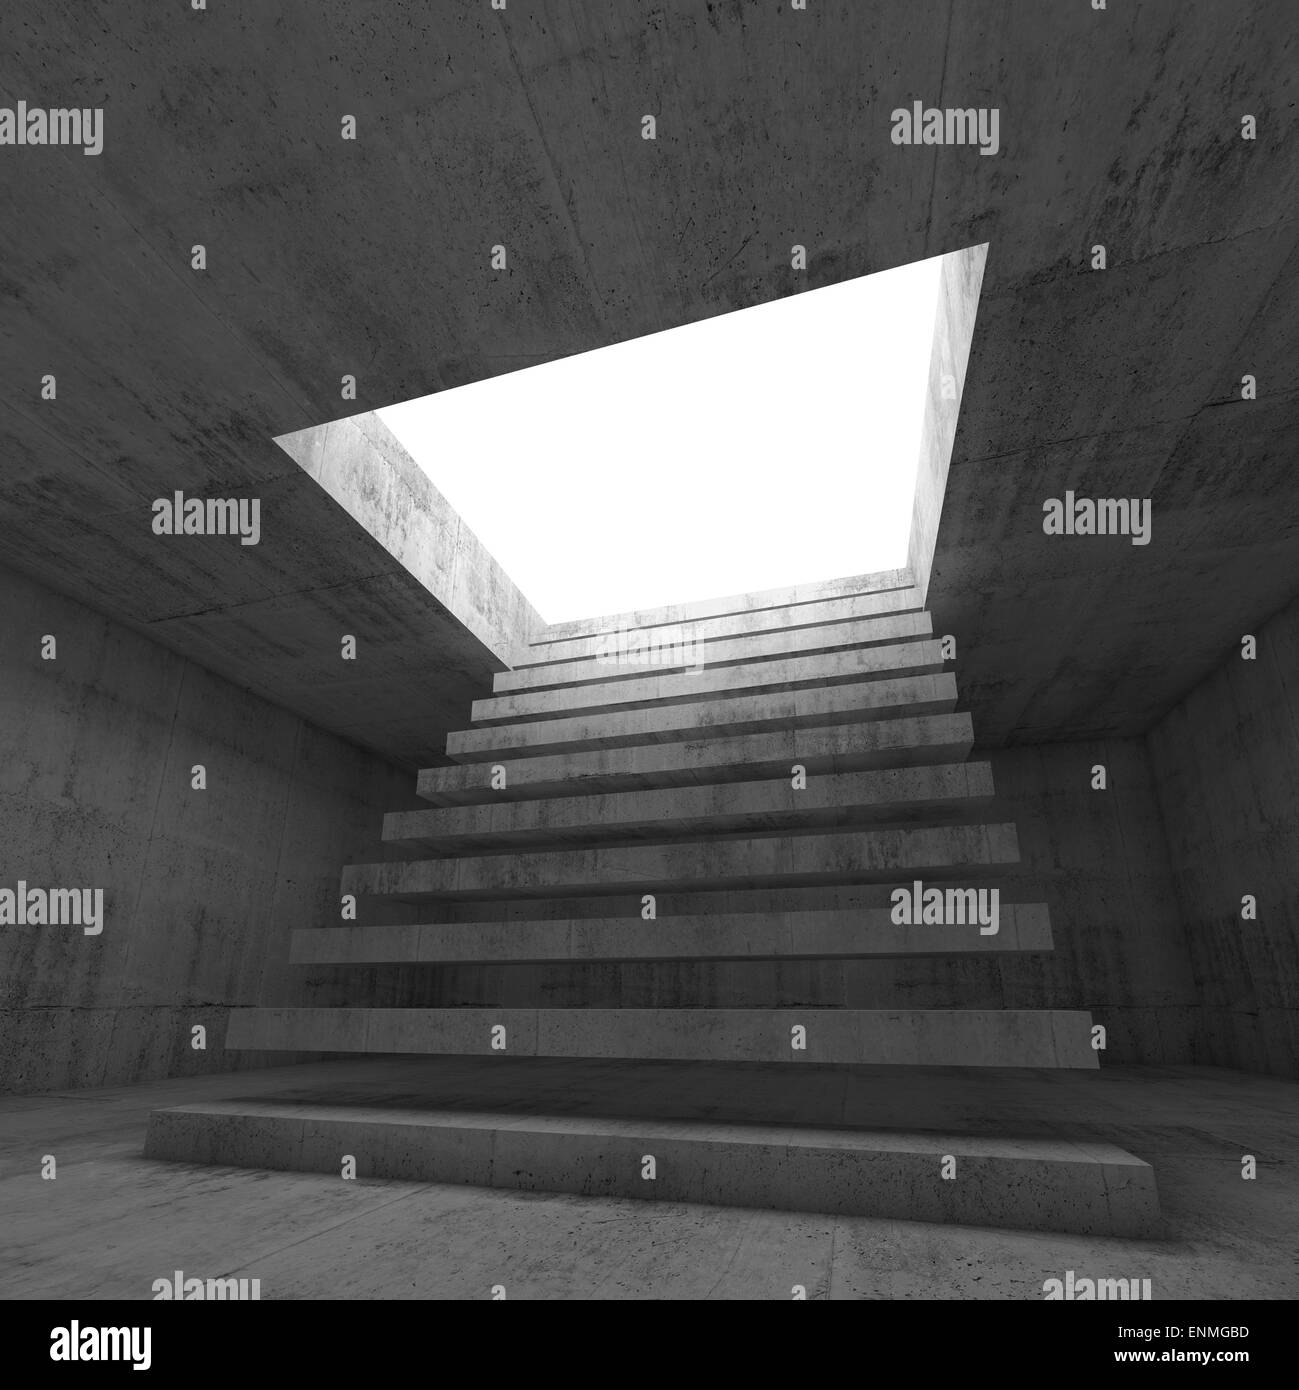 Abstract empty dark concrete 3d illustration interior background with stairway going up and out Stock Photo